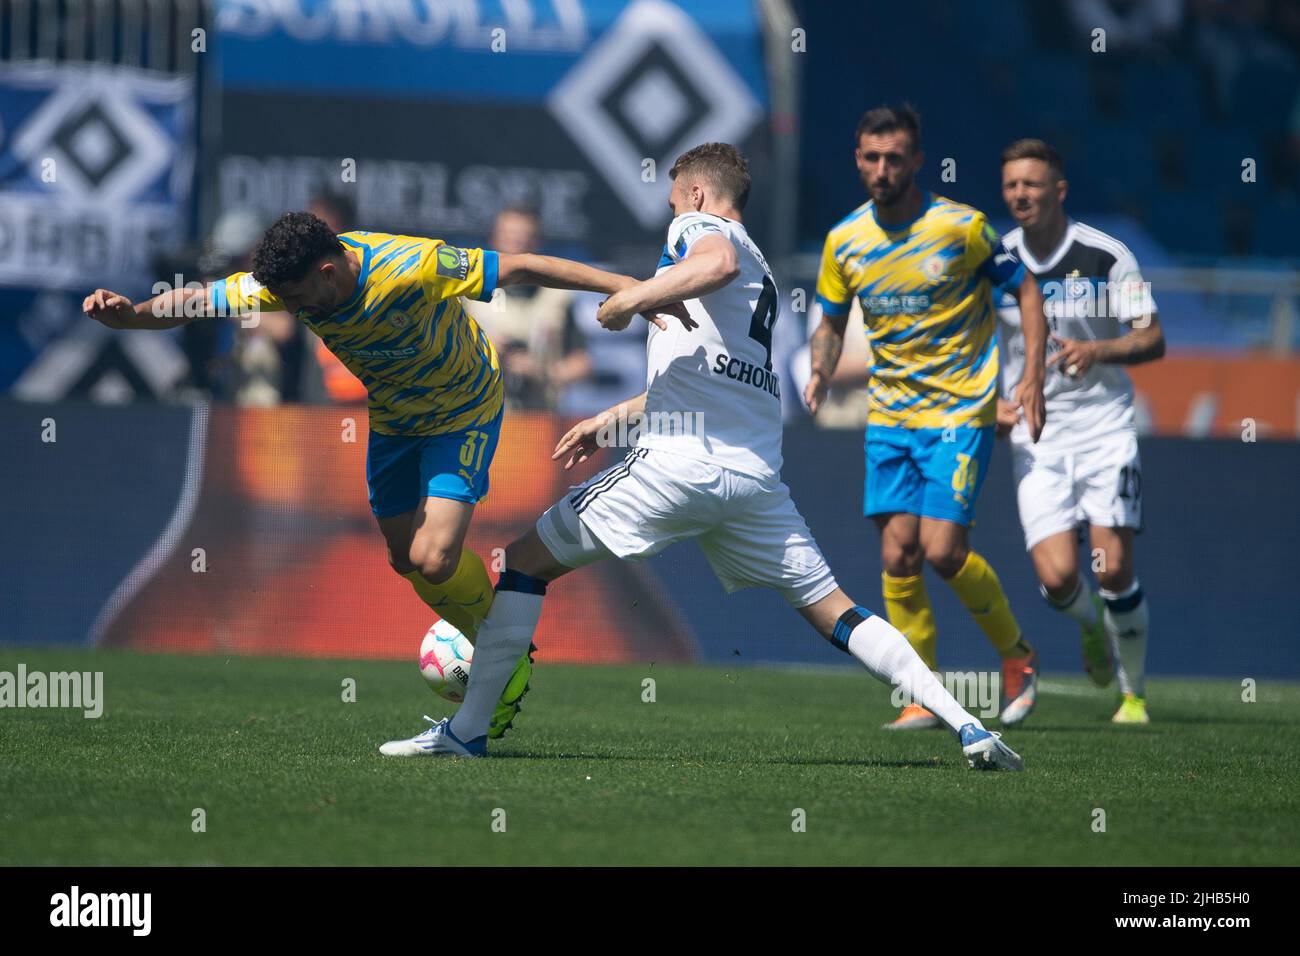 Brunswick, Germany. 17th July, 2022. Soccer: 2nd Bundesliga, Eintracht Braunschweig - Hamburger SV, Matchday 1, Eintracht Stadium. Braunschweig's Fabio Kaufmann (l) plays against Hamburg's Sebastian Schonlau. Credit: Swen Pförtner/dpa - IMPORTANT NOTE: In accordance with the requirements of the DFL Deutsche Fußball Liga and the DFB Deutscher Fußball-Bund, it is prohibited to use or have used photographs taken in the stadium and/or of the match in the form of sequence pictures and/or video-like photo series./dpa/Alamy Live News Stock Photo